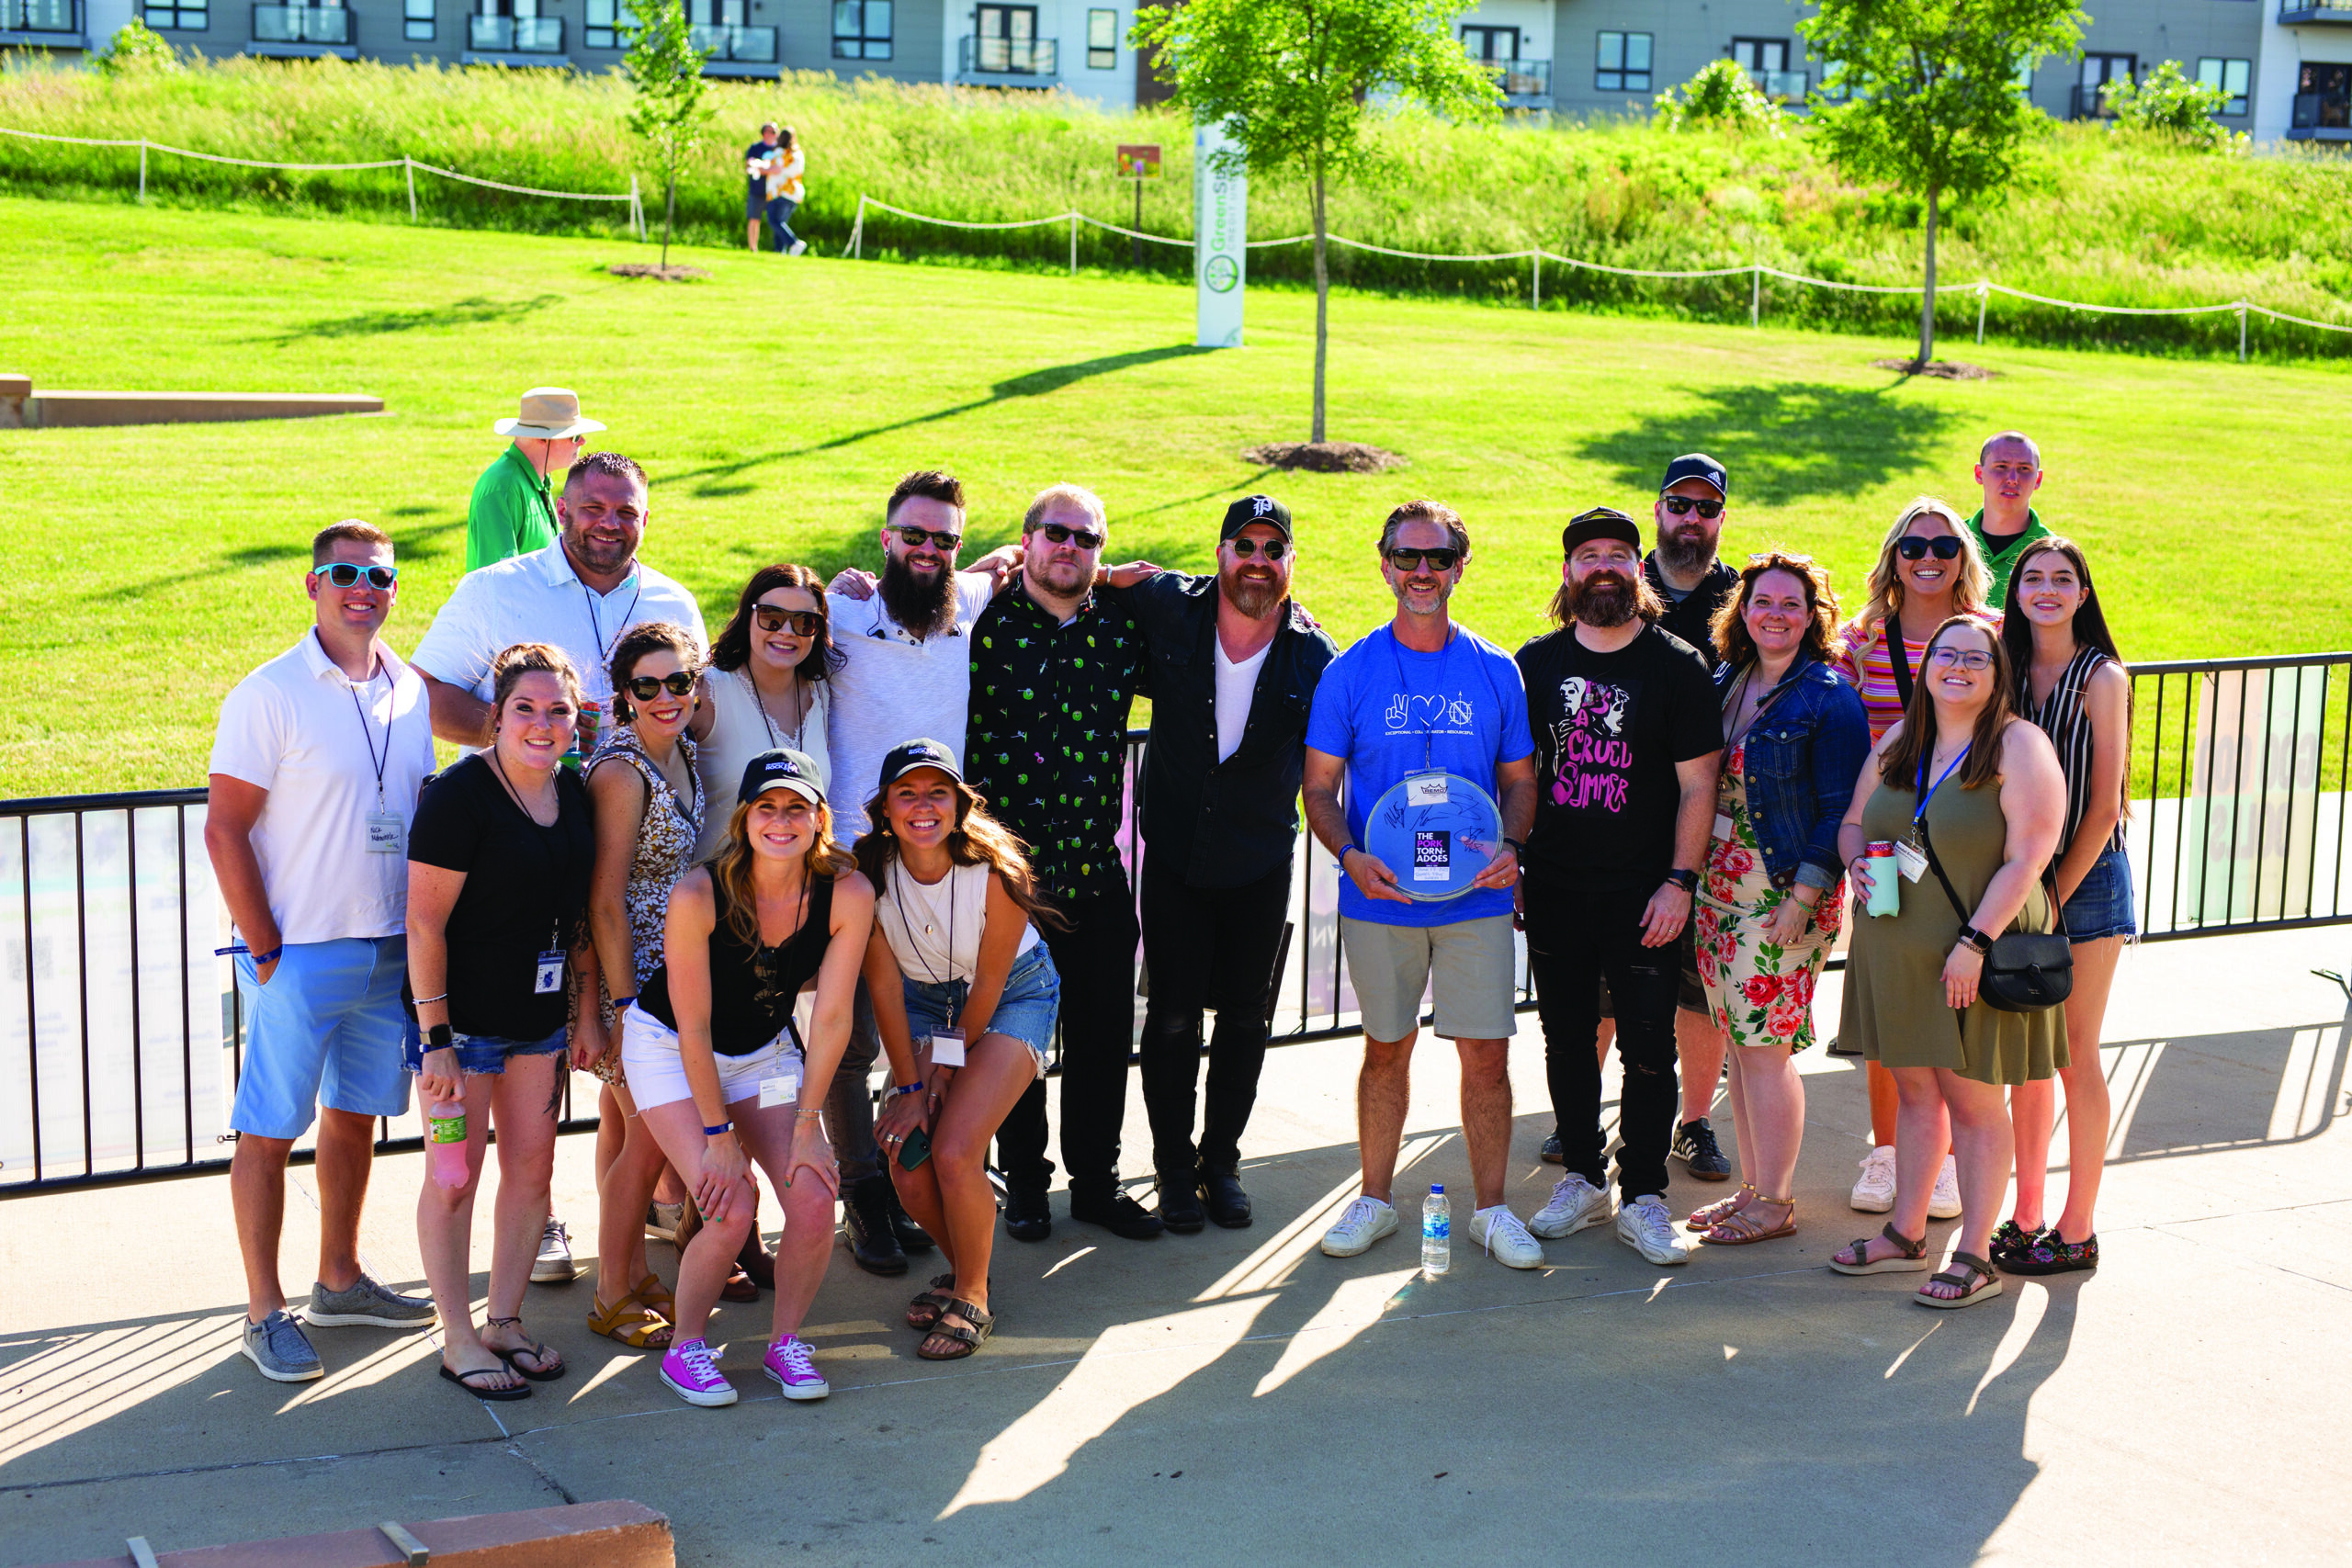 The TrueNorth team pictured at a company outing. CREDIT TRUENORTH